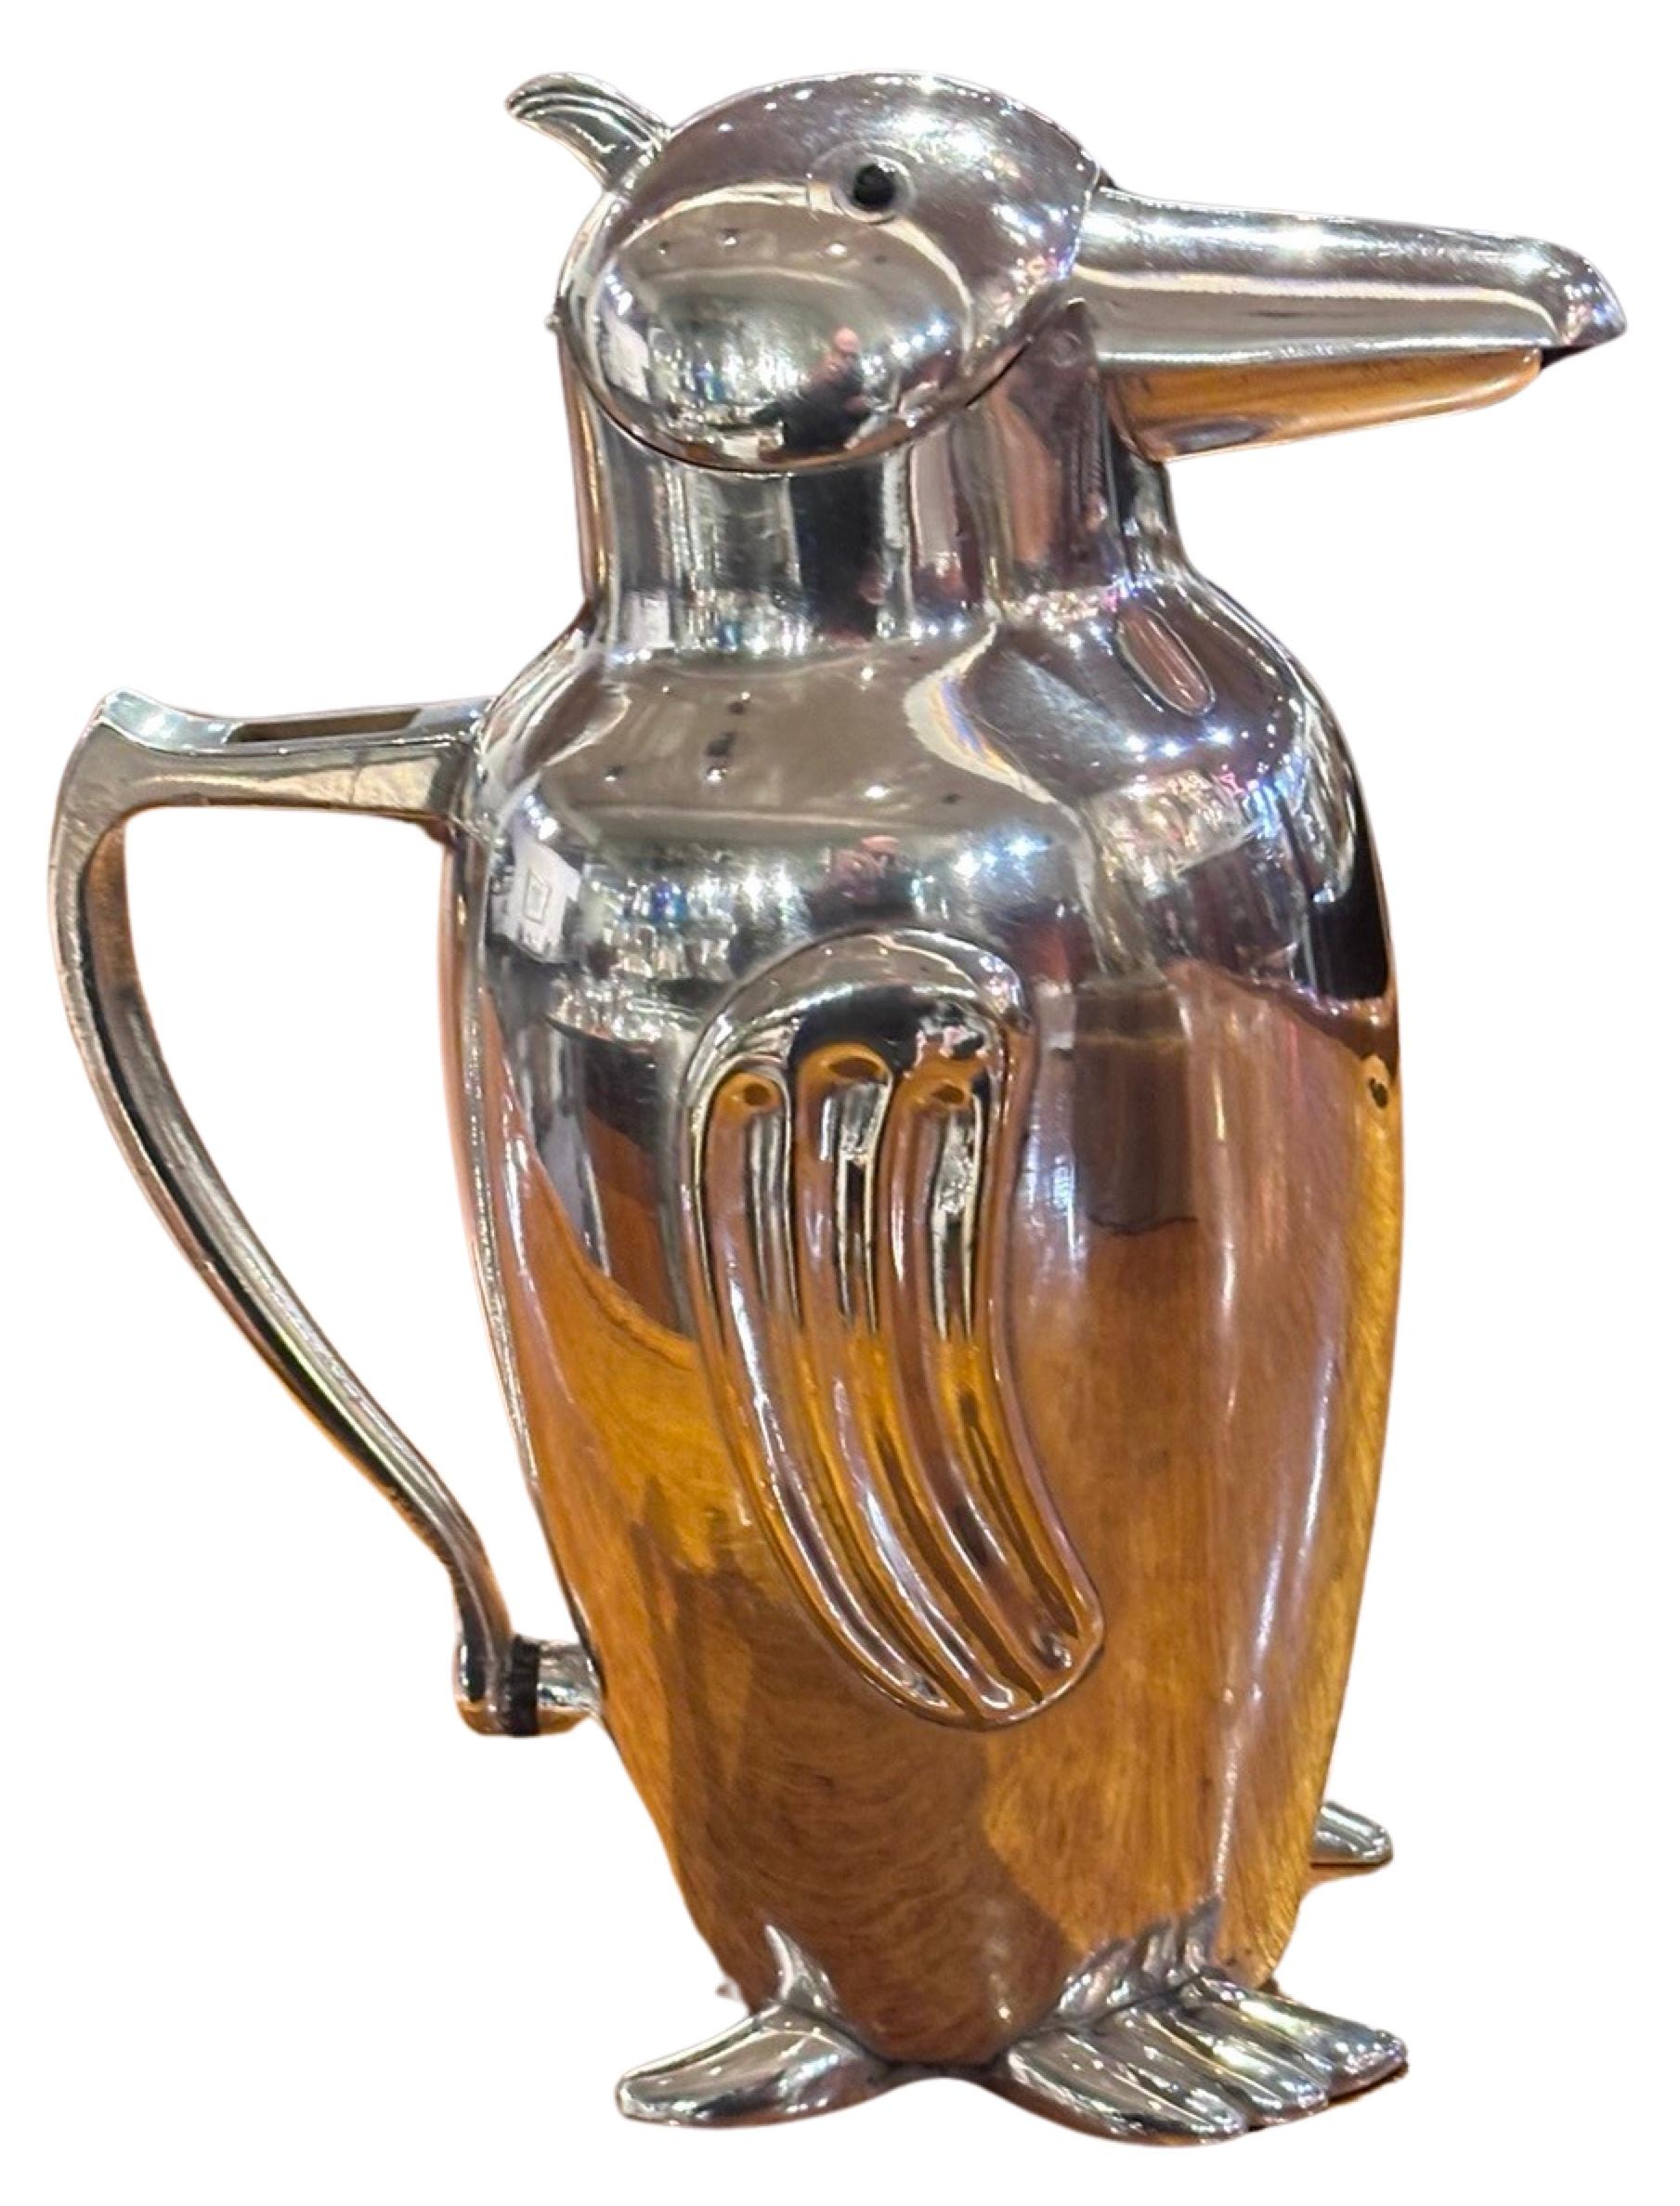 Vintage Penguin Figural Art Deco Cocktail Shaker. This unique vintage cocktail shaker or pitcher is shaped like a penguin, originally designed in Italy, and is highly sought after.  It features exquisite detail, including a ribbed pattern on the